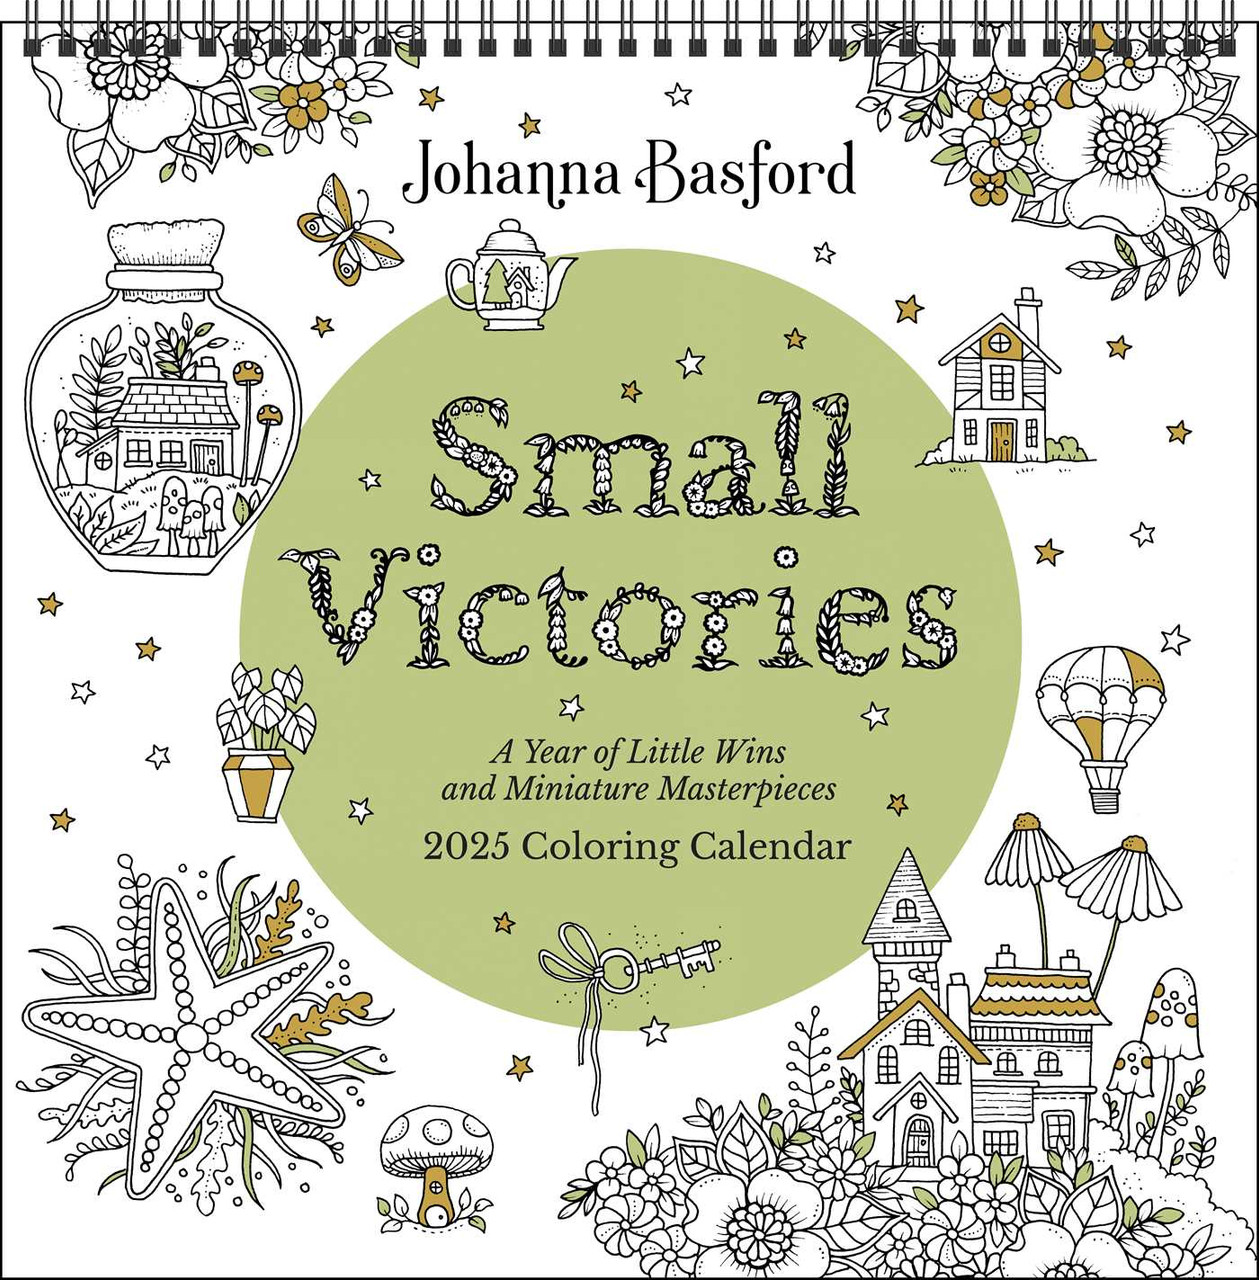 Small Victories: A Coloring Book of Little Wins and Miniature Masterpieces [Book]